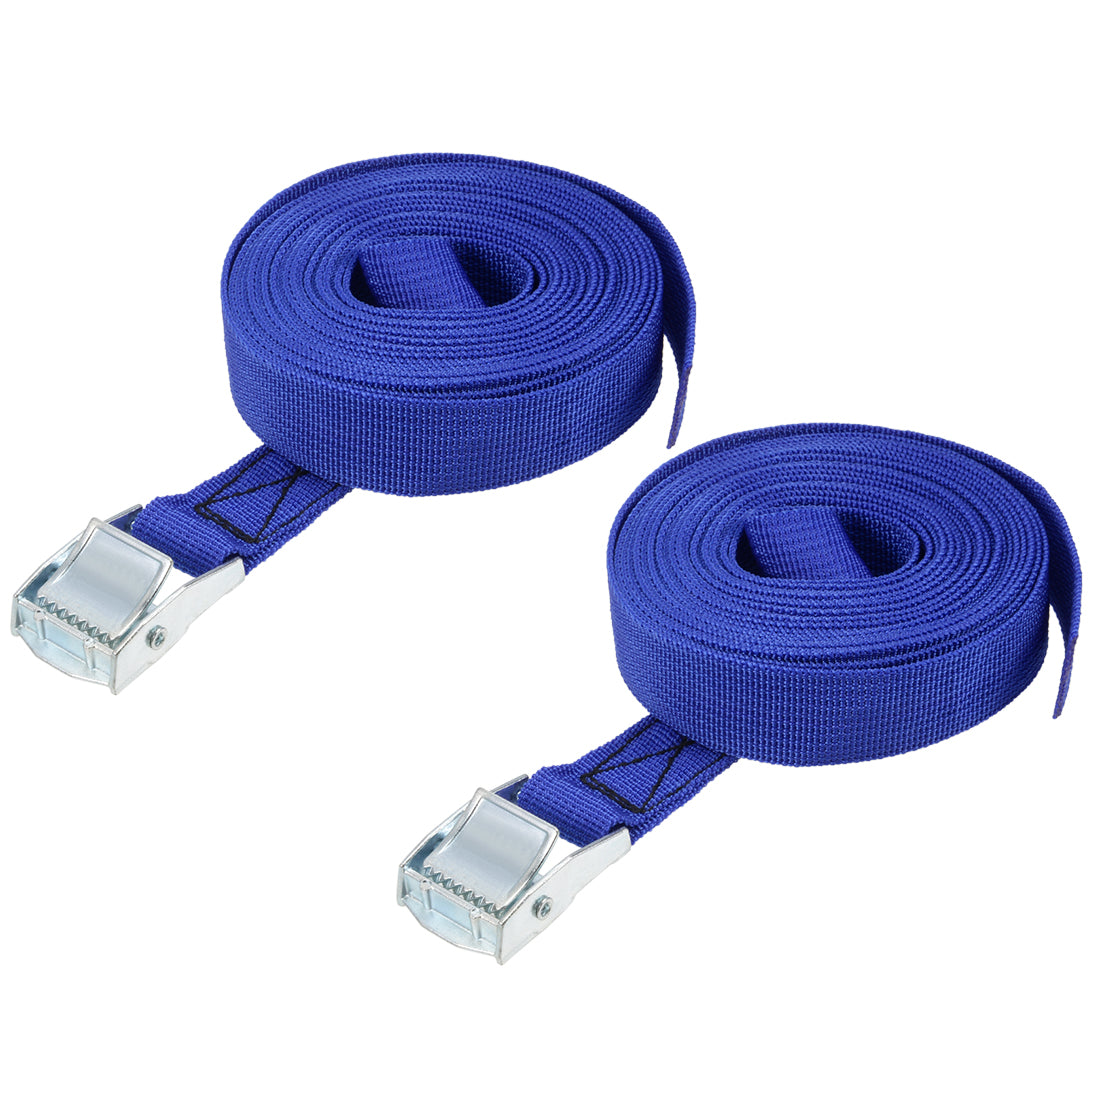 uxcell Uxcell 4.5M x 25mm Lashing Strap Cargo Tie Down Straps w Cam Lock Buckle 250Kg Work Load, Blue, 2Pcs